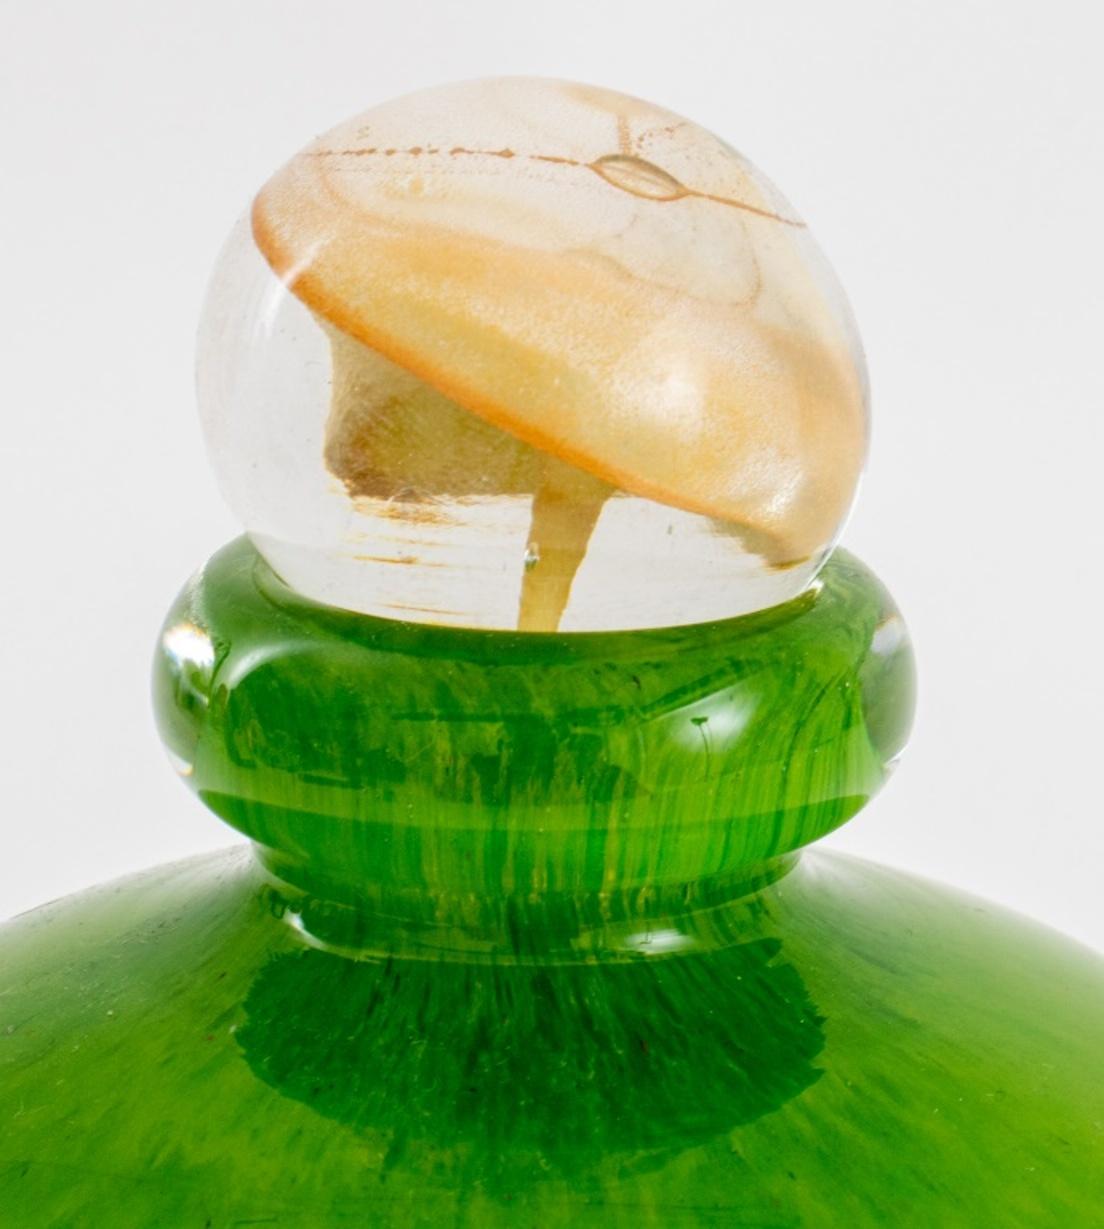 American studio hand blown glass bottle with stopper, signed to underside, circa 2003.

Dimensions: 7.25